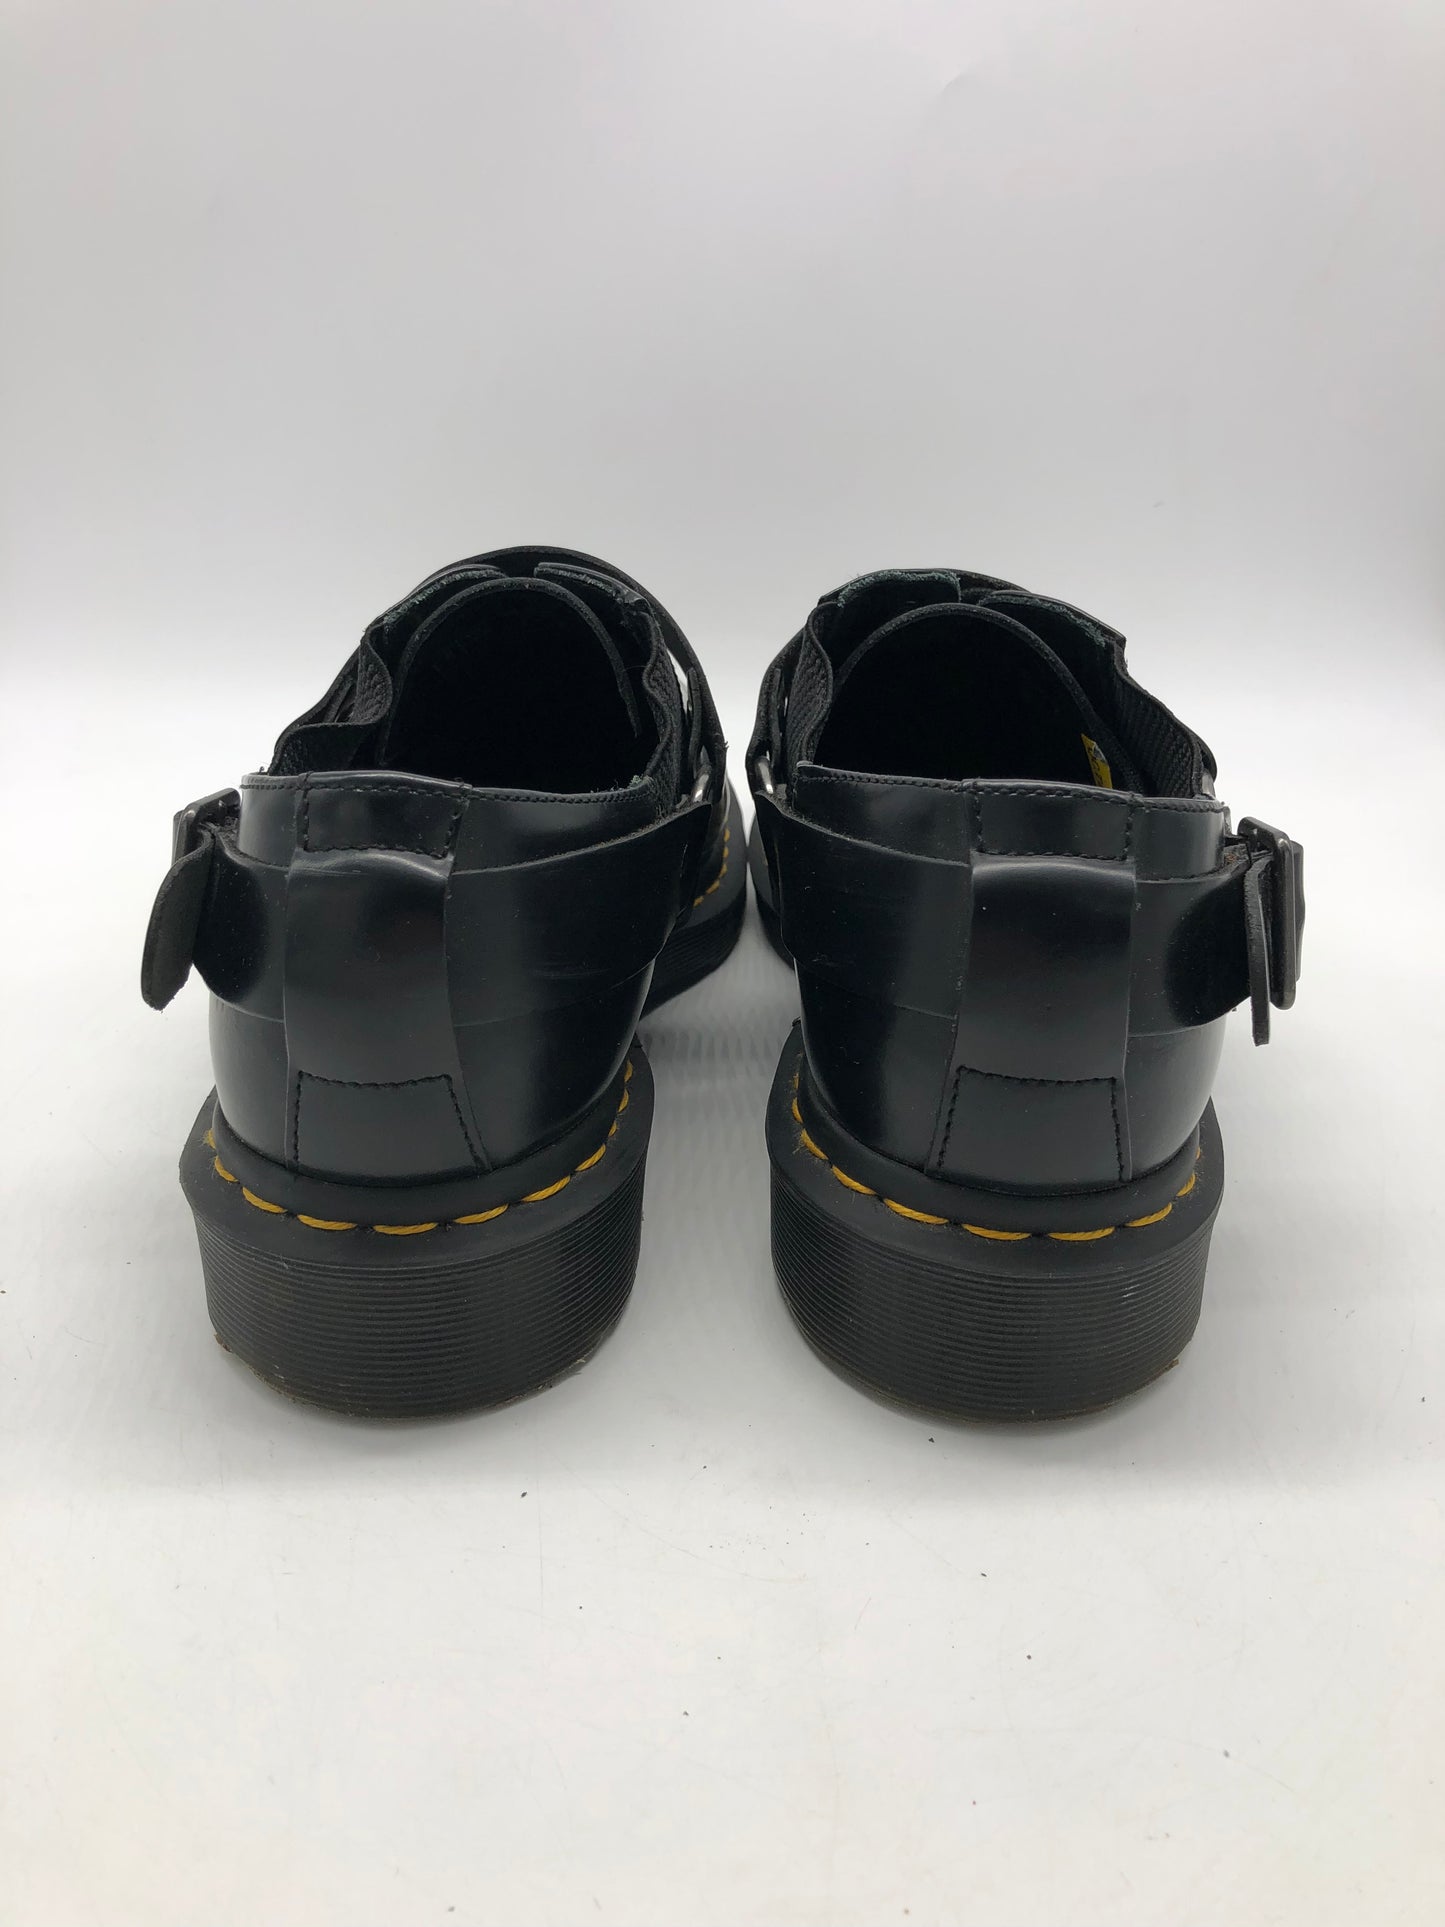 Preowned Dr. Martens Buckle Derby Boots Sz 10M/11.5W